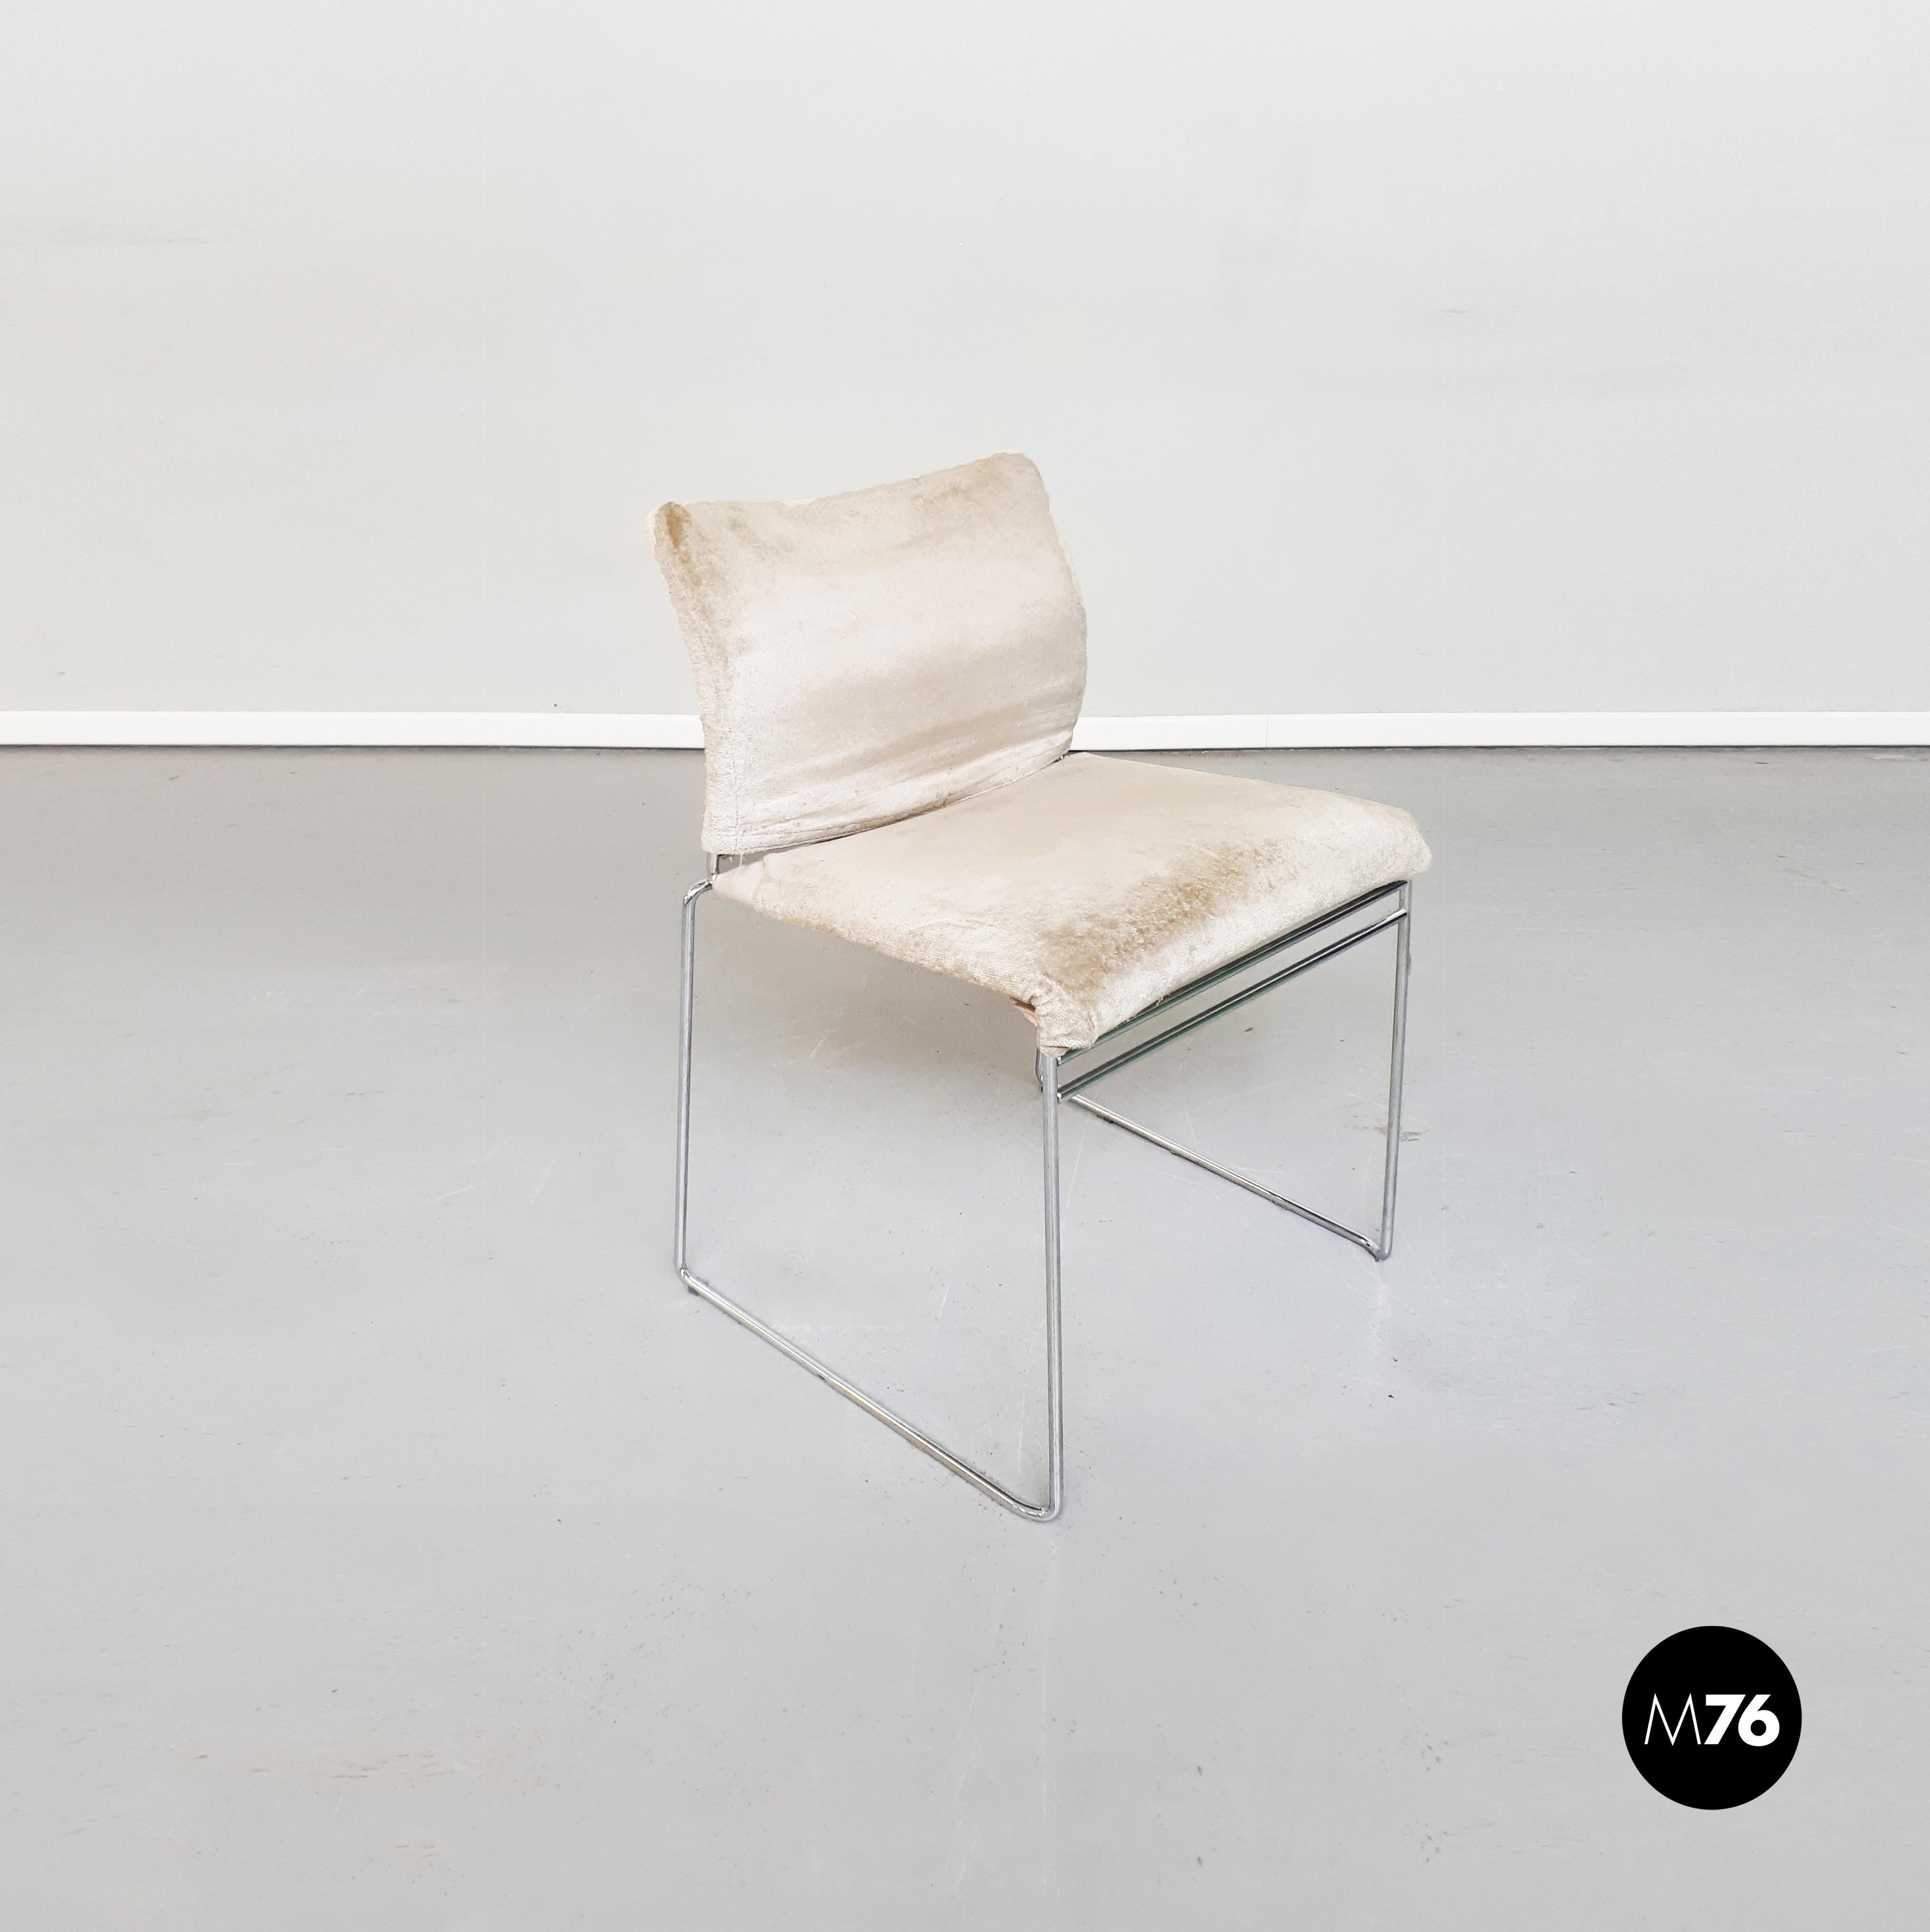 Italian mid-century Tulu chairs by Kazuhide Takahama for Cassina, 1960s.
Set of six Tulu chairs, with fully upholstered seat, covered with a white velvet and with metal structure and reinforced with elastic straps.
Designed by Kazuhide Takahama for